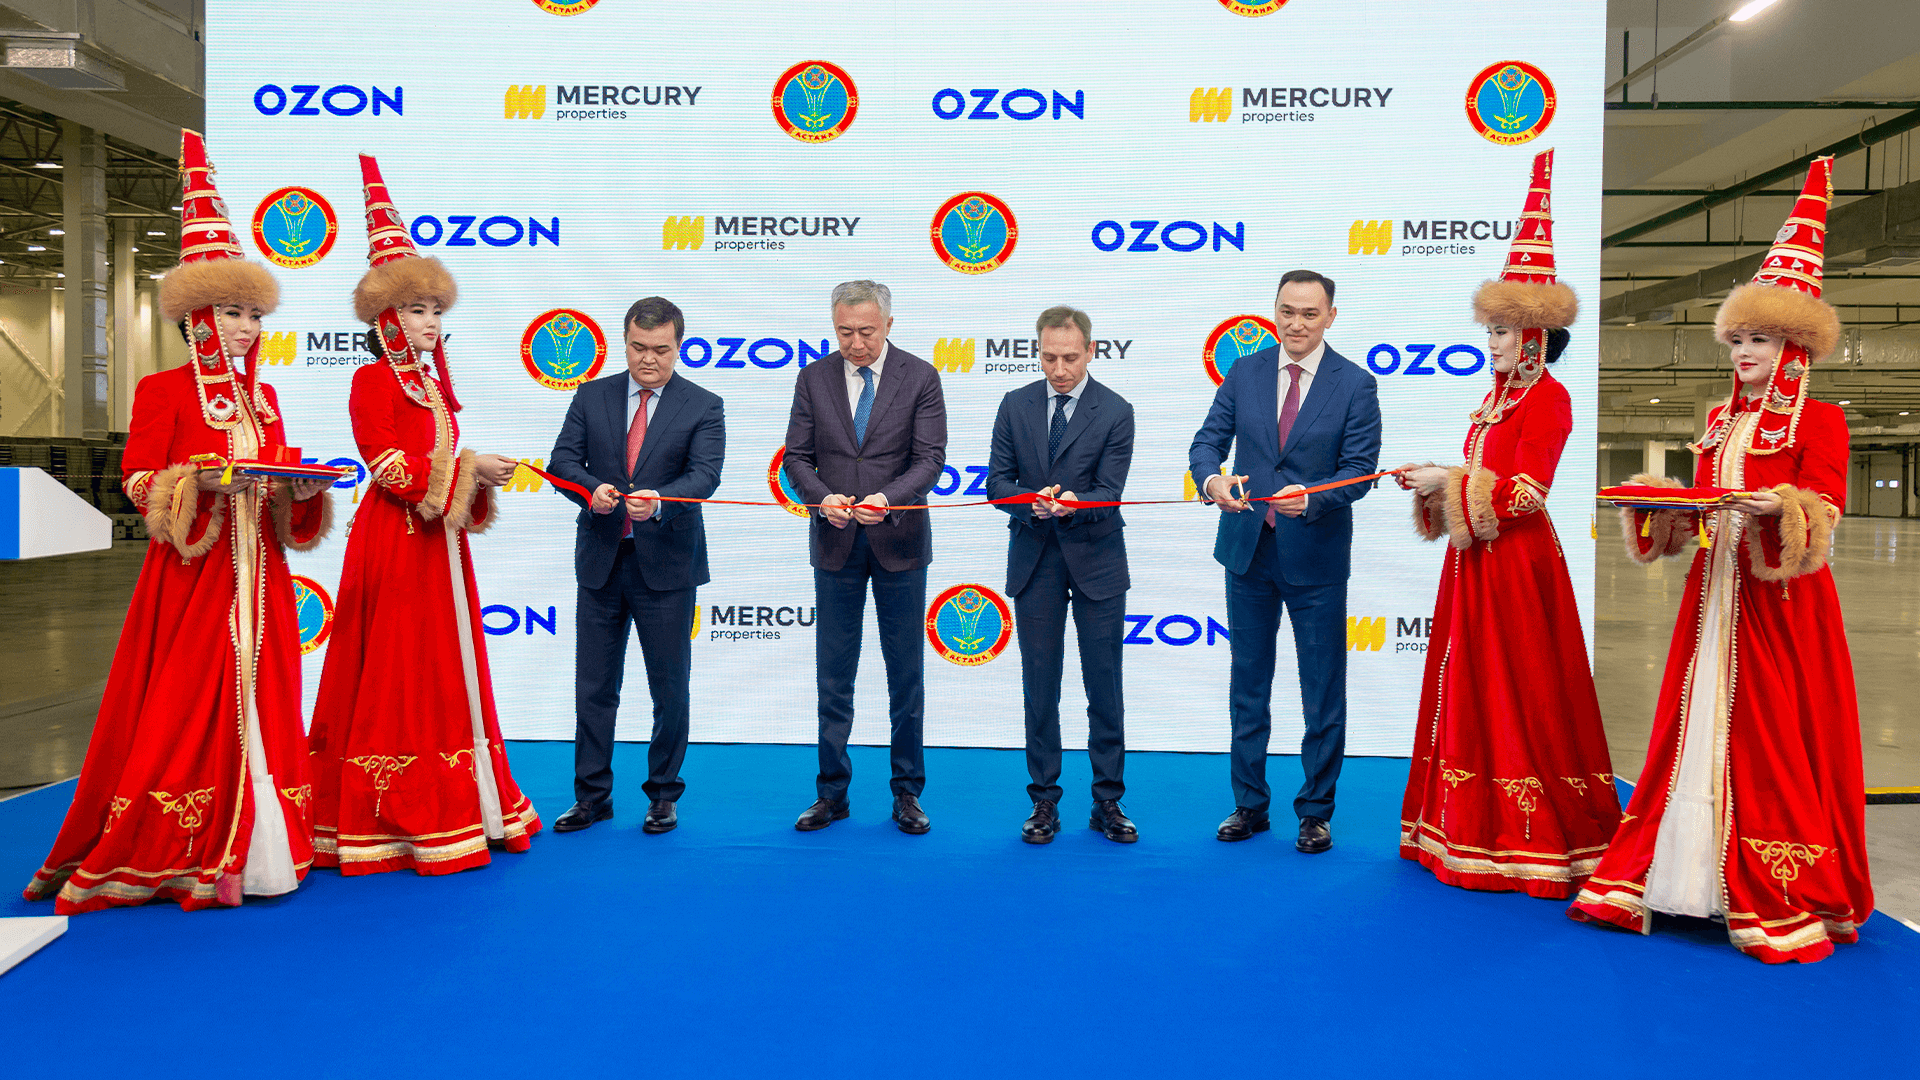 The largest fulfillment center OZON in the CIS opened in Astana